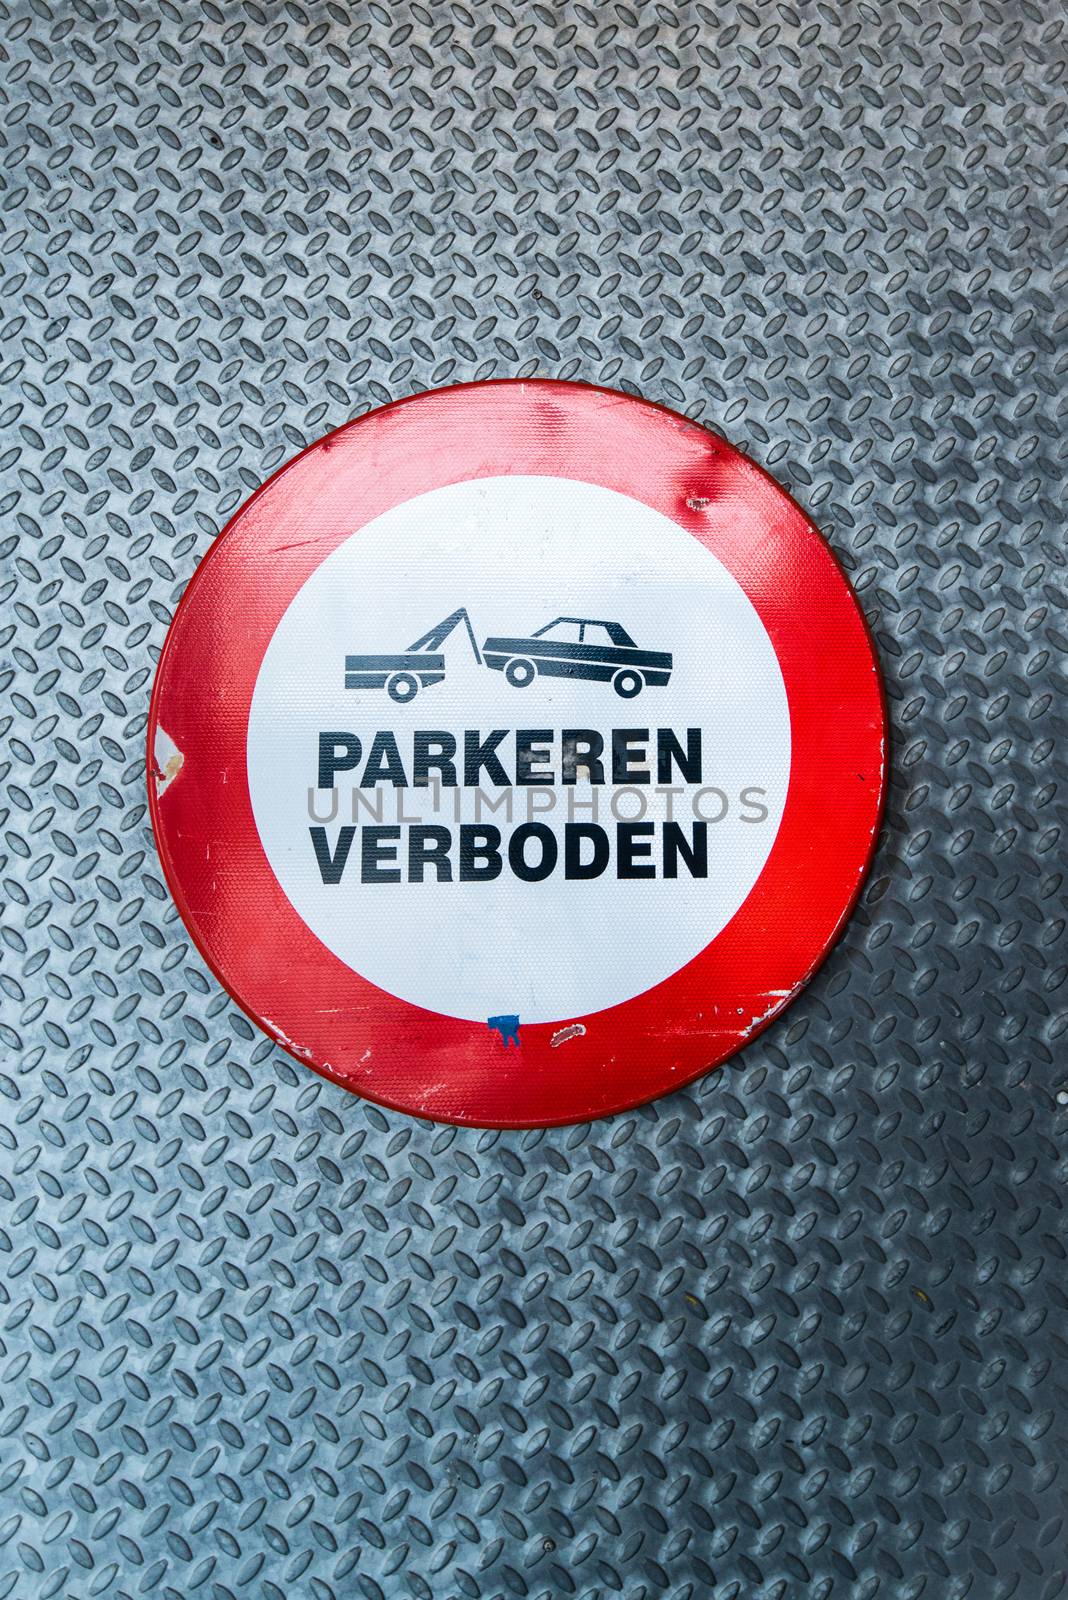 Dutch no parking sign with wording "parkeren verboden" and a car being towed away on metal door background